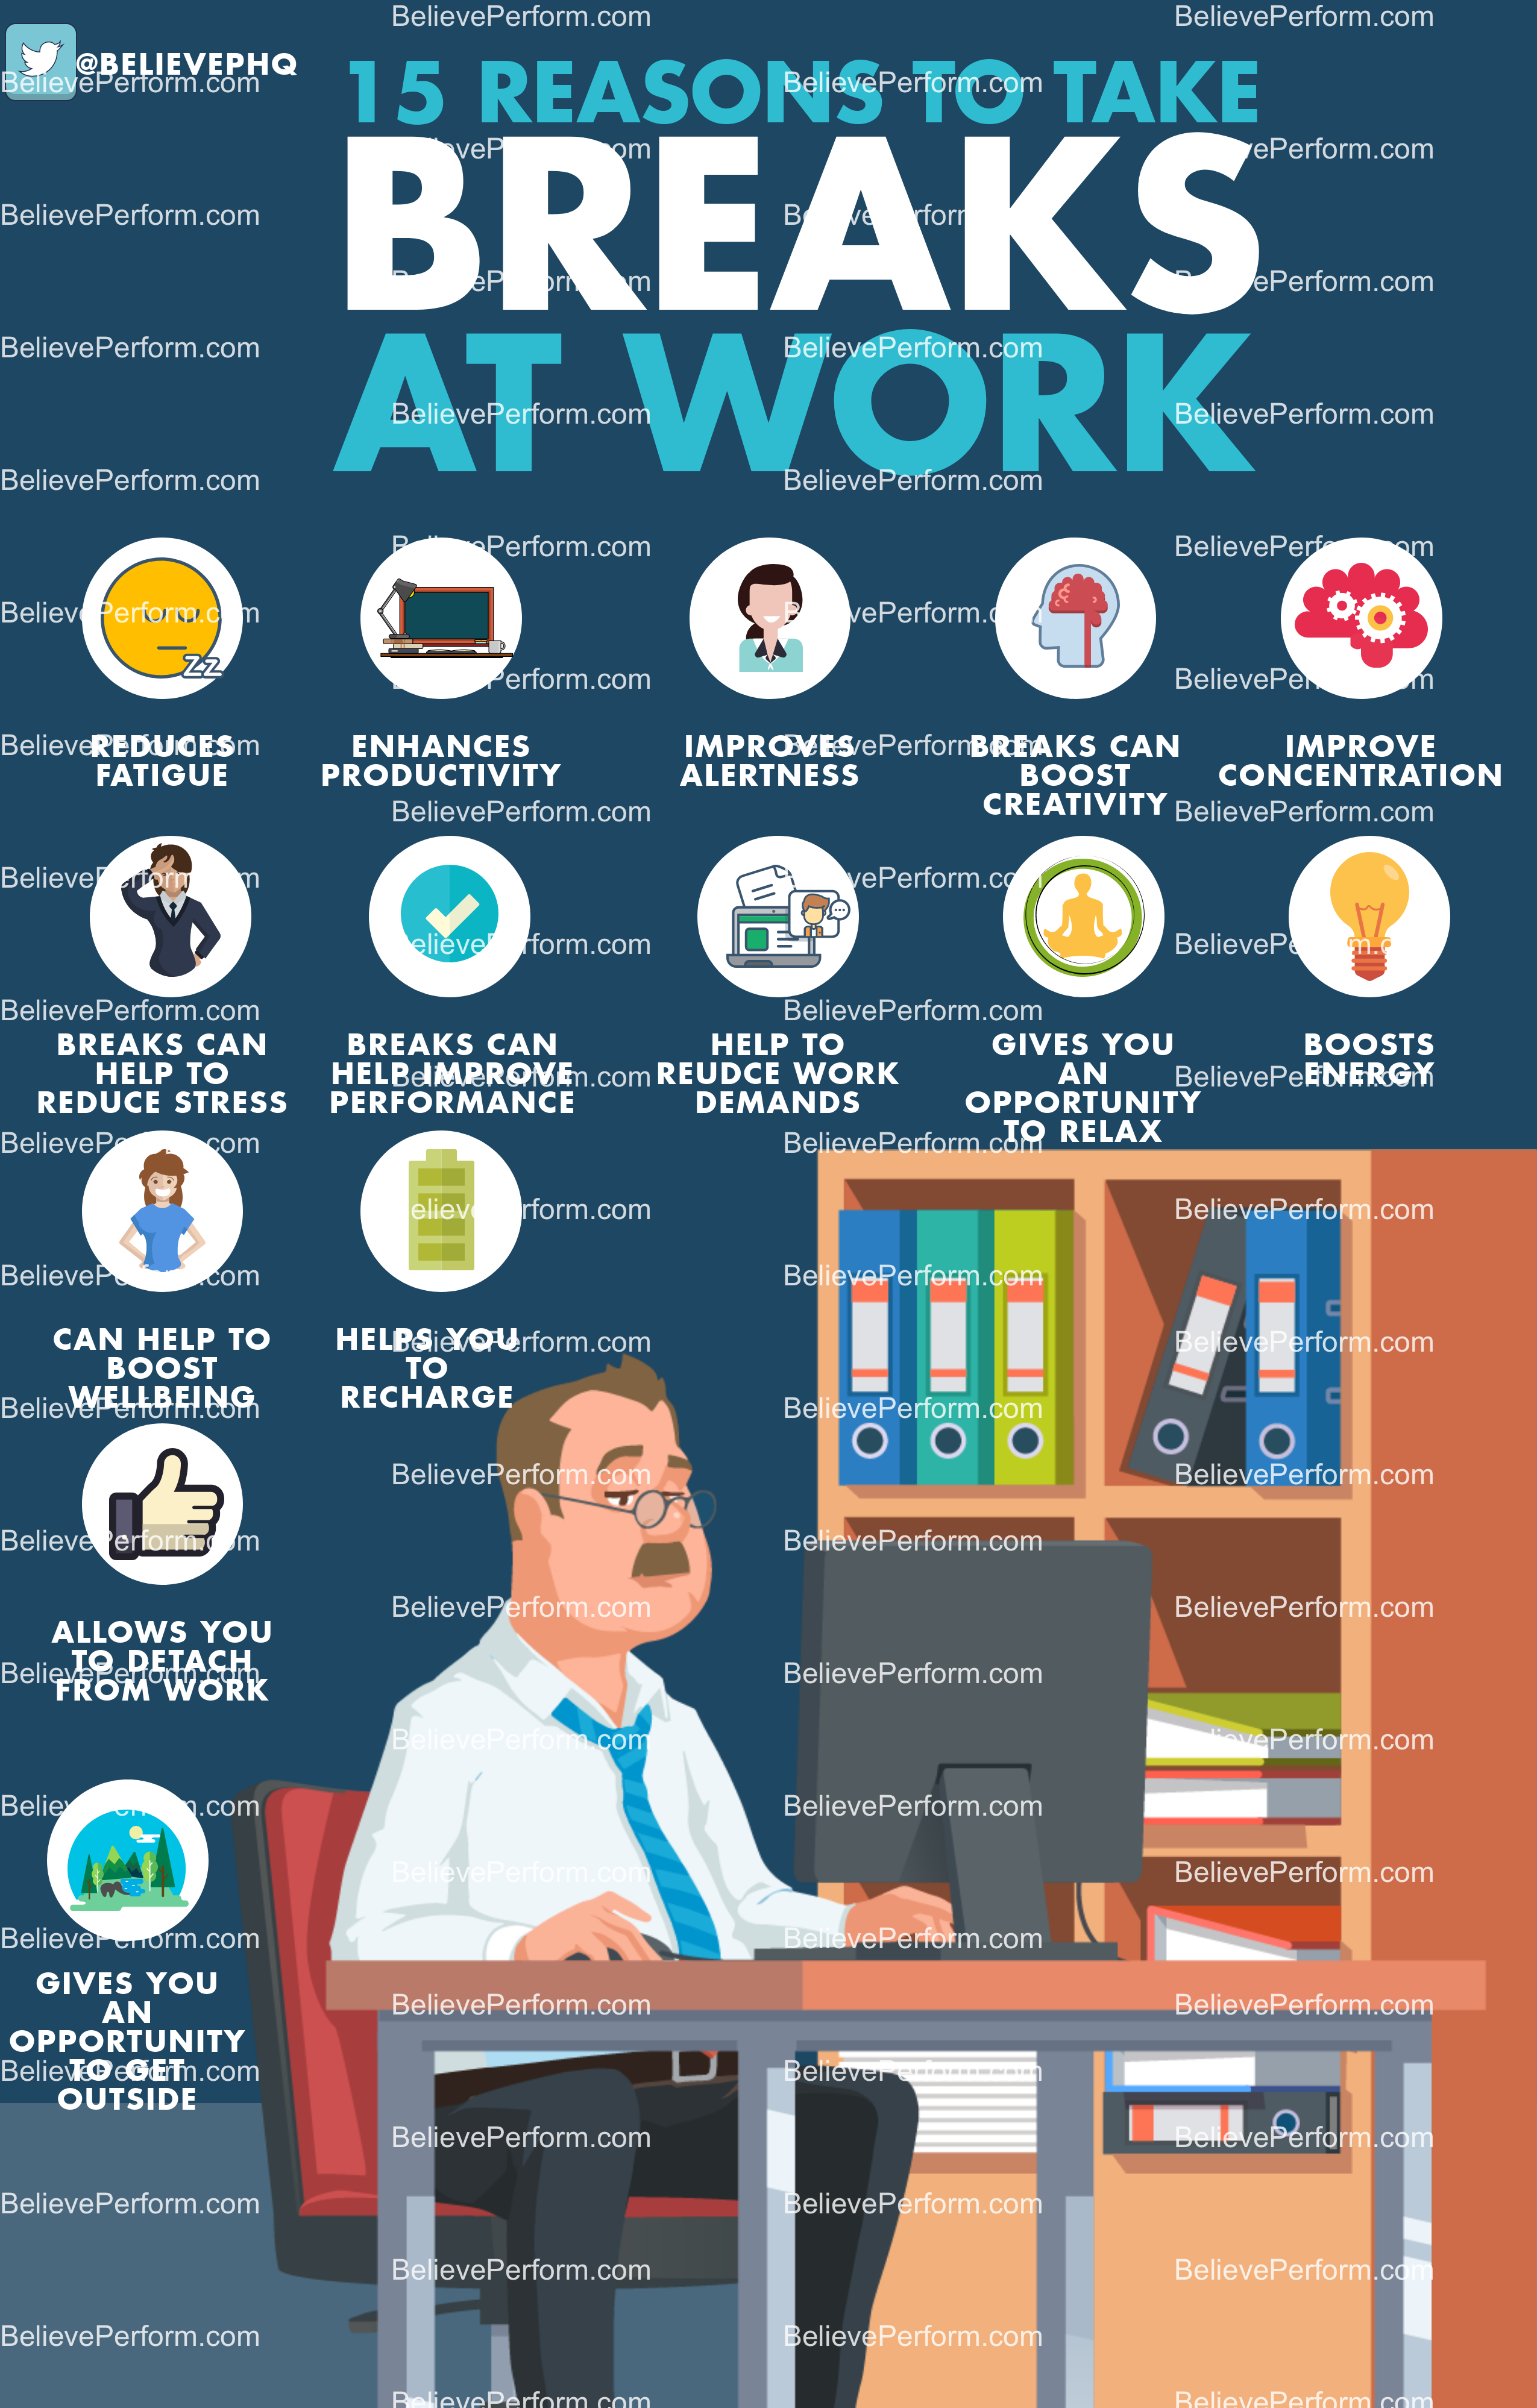 15 reasons to take breaks at work - BelievePerform - The UK's leading